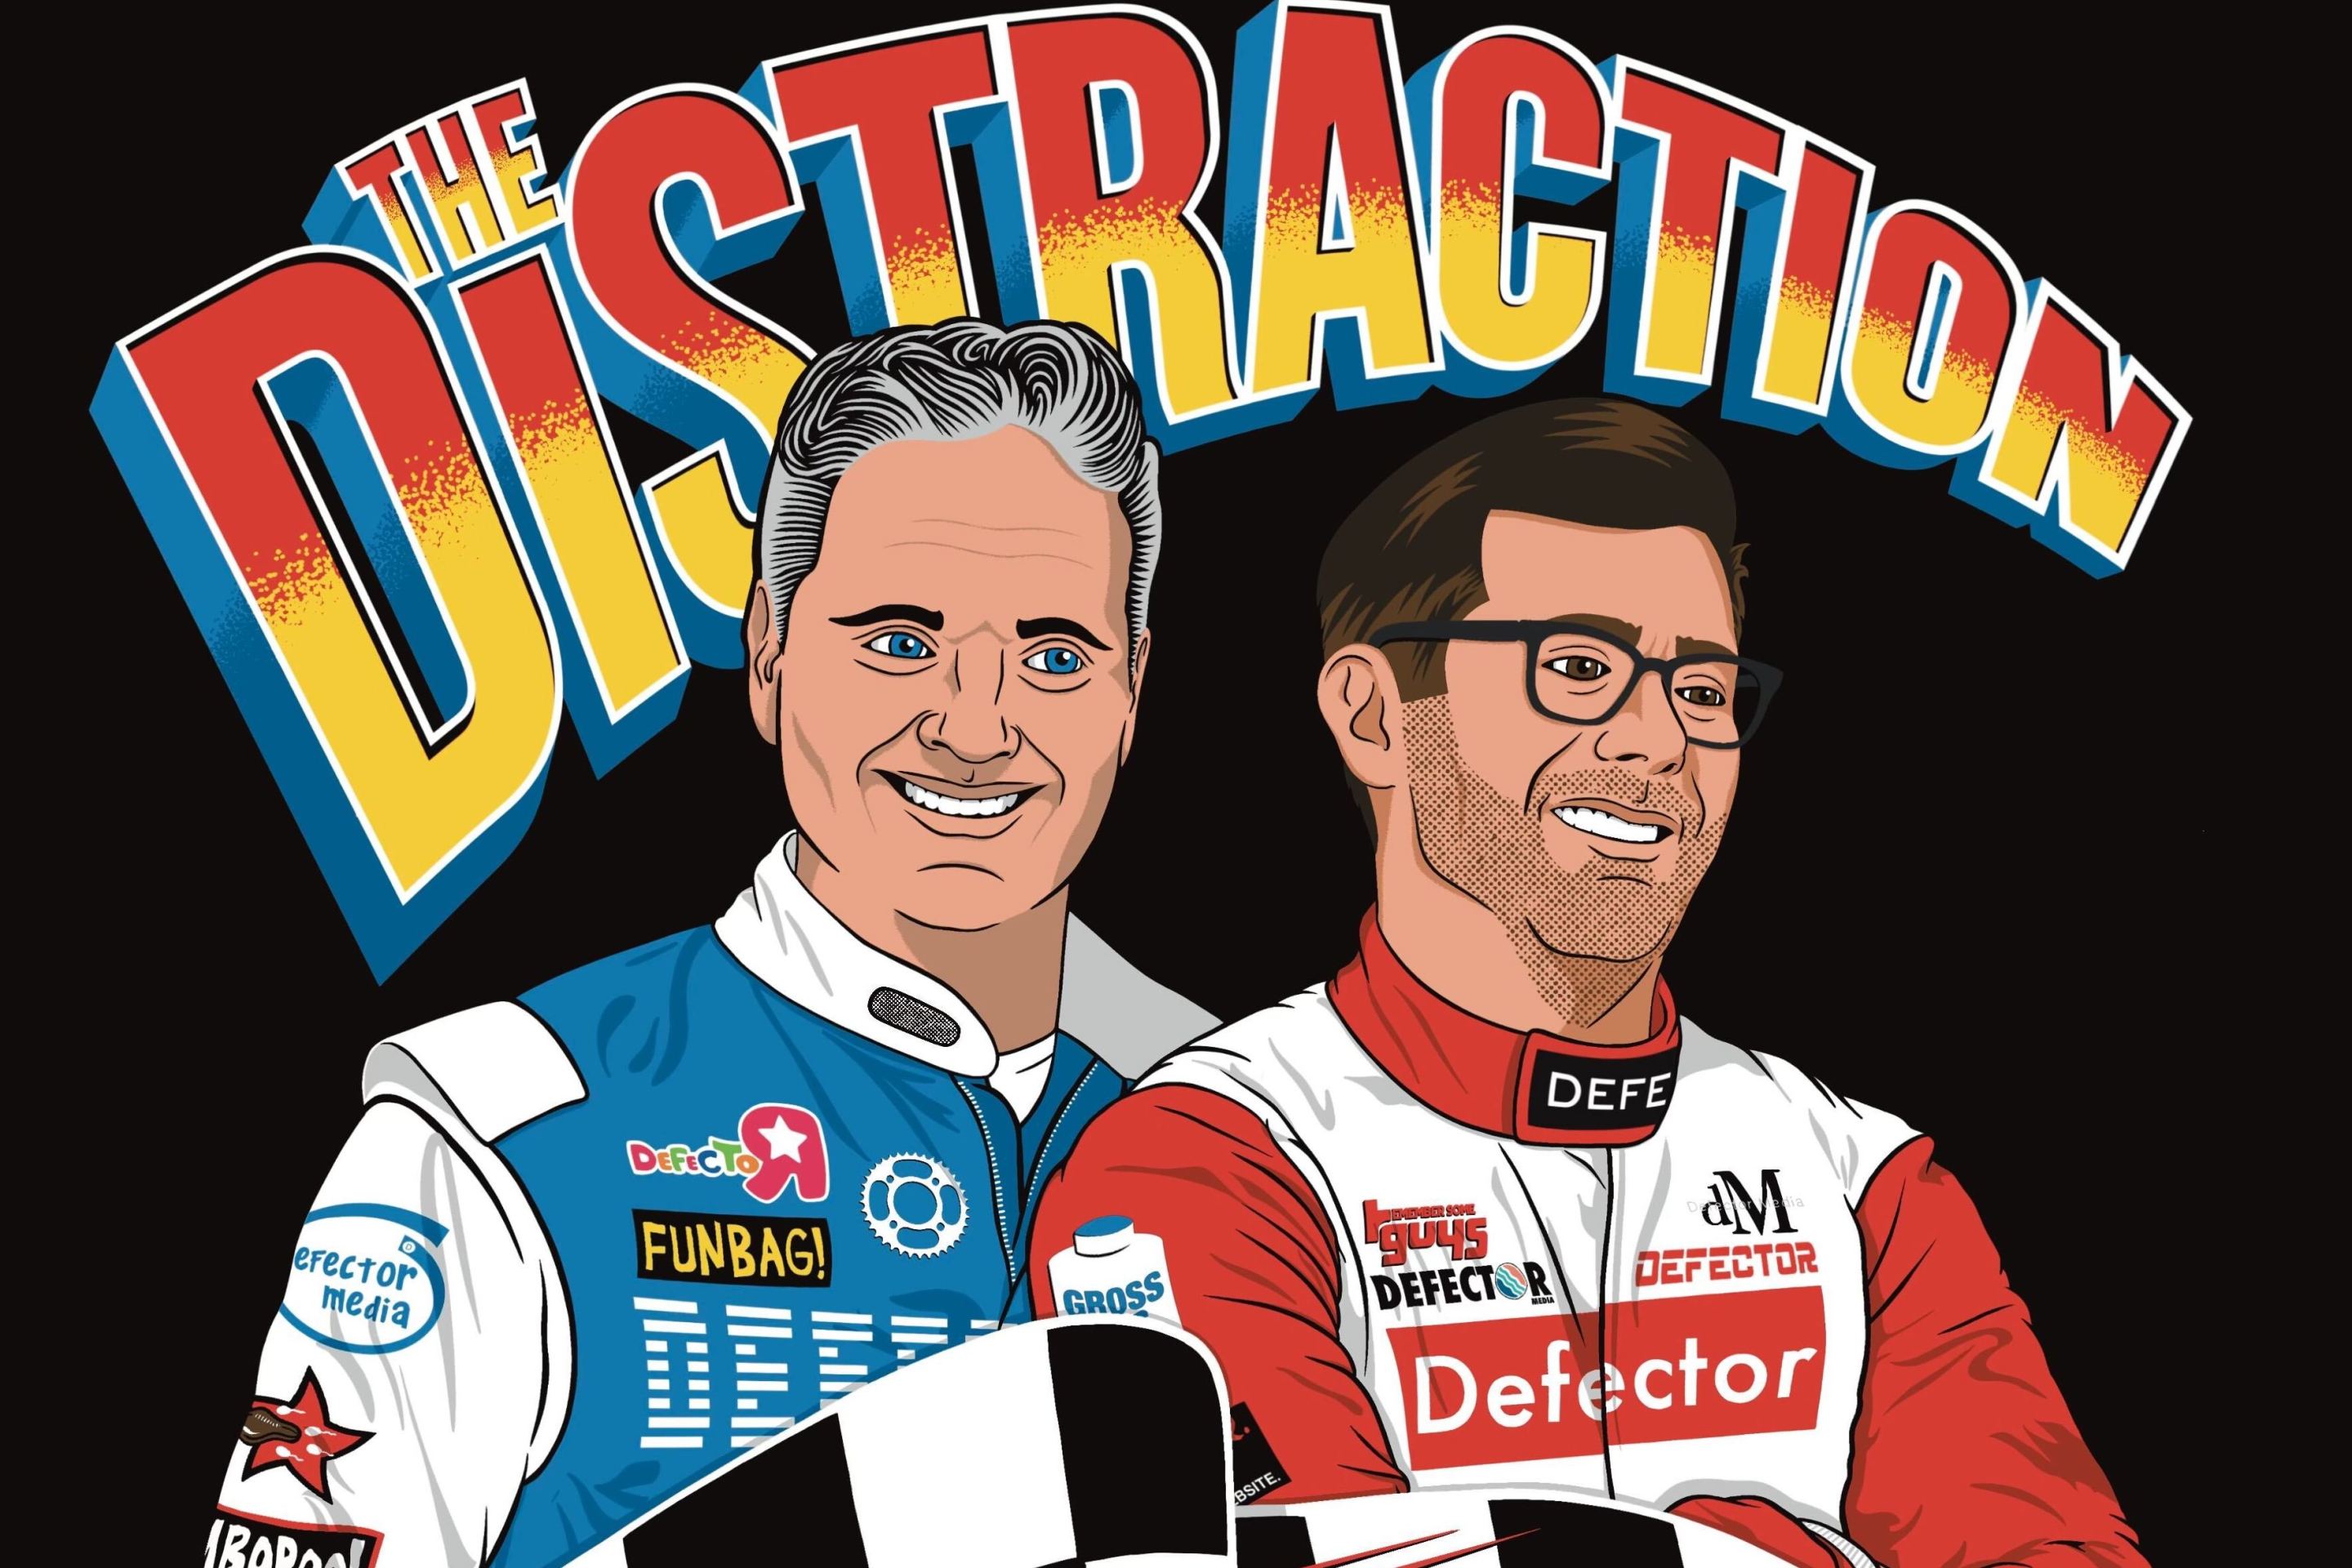 An illustration of the cohosts of The Distraction, in the style of a Nascar fan t-shirt. We're both wearing those fire-suits and appear deeply tan.